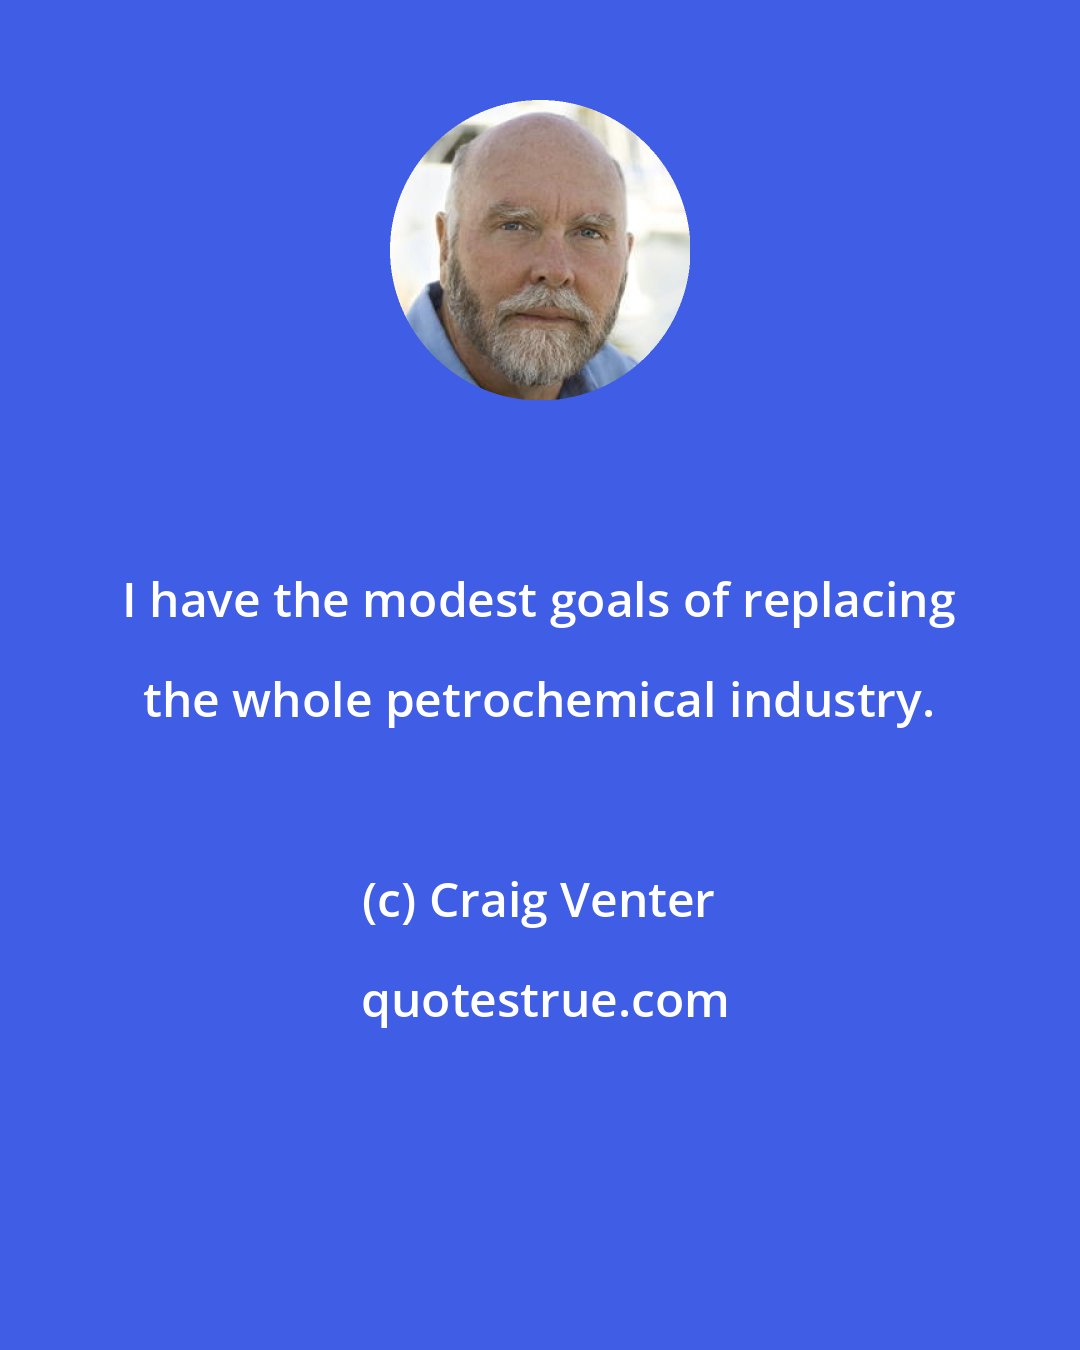 Craig Venter: I have the modest goals of replacing the whole petrochemical industry.